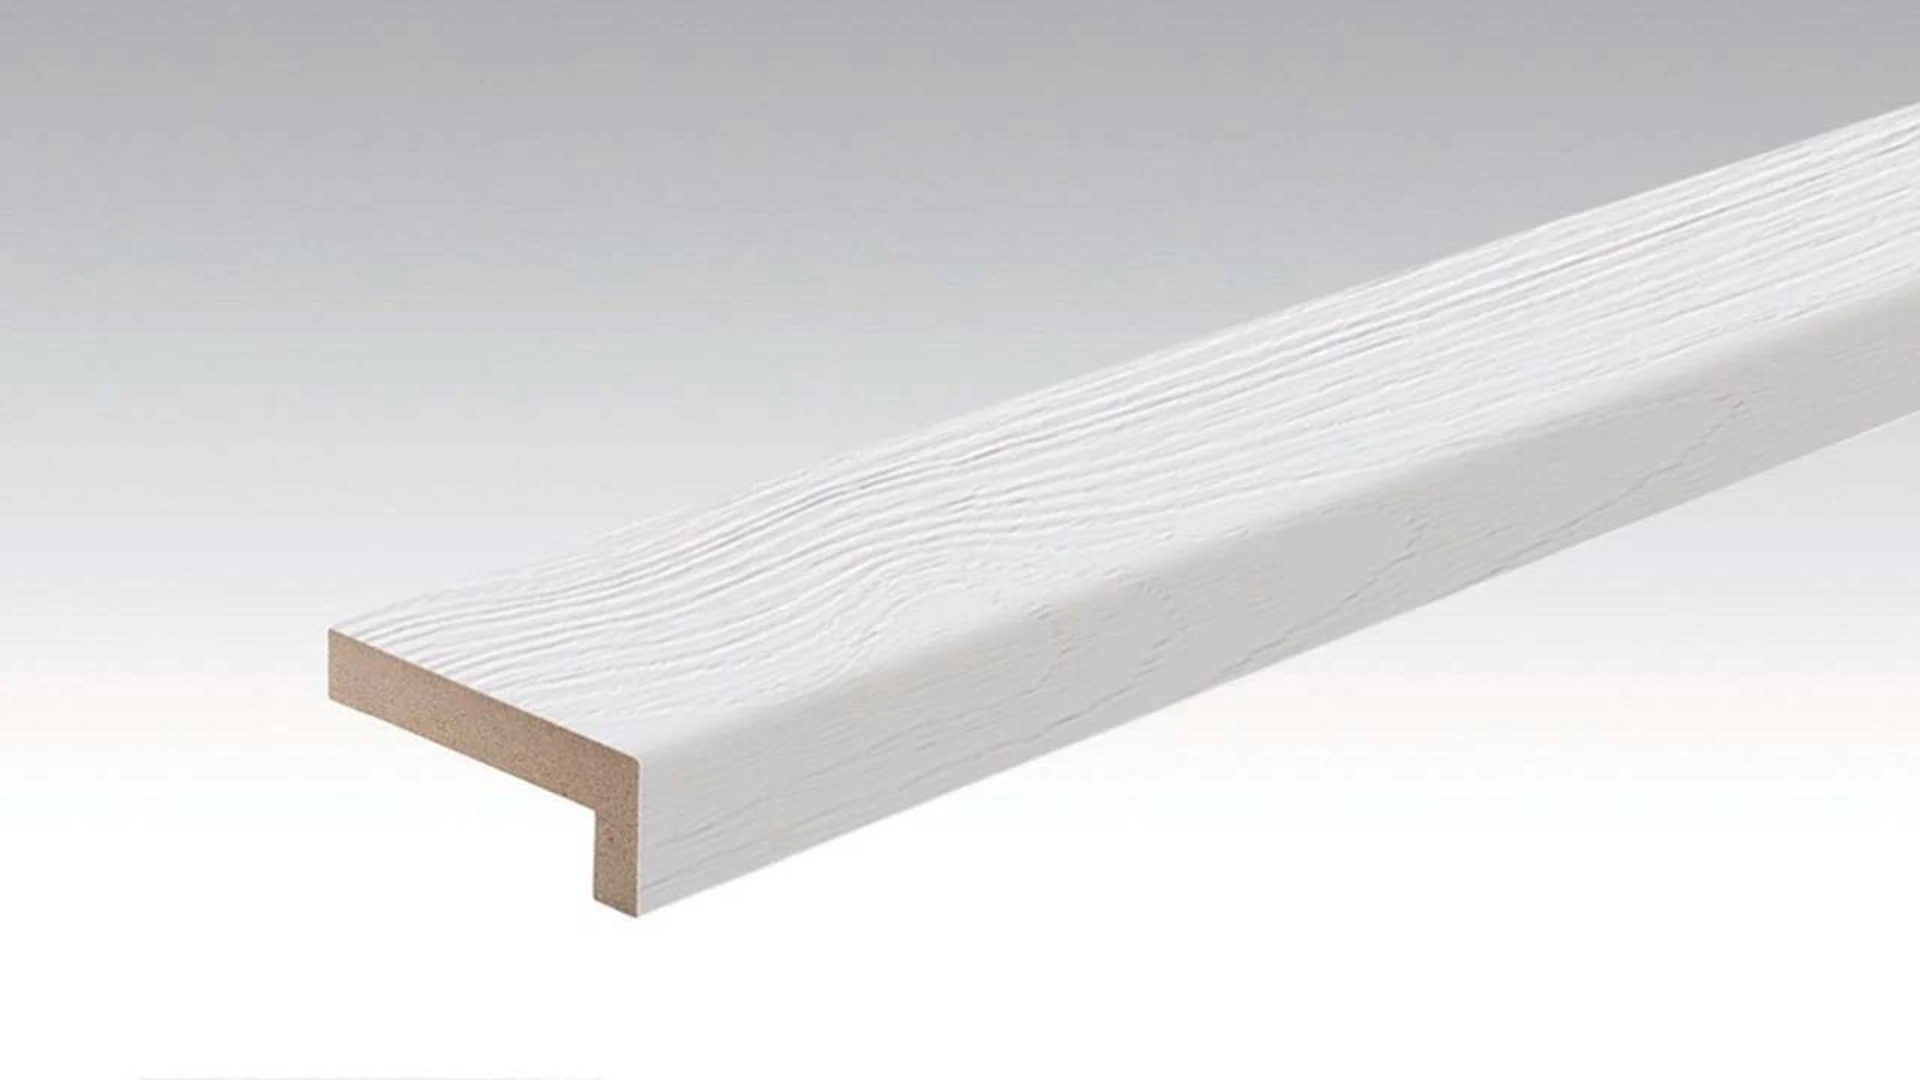 MEISTER Angle cover strip Mountain Wood white 4205 - 2380 x 60 x 22 mm (200028-2380-04205)